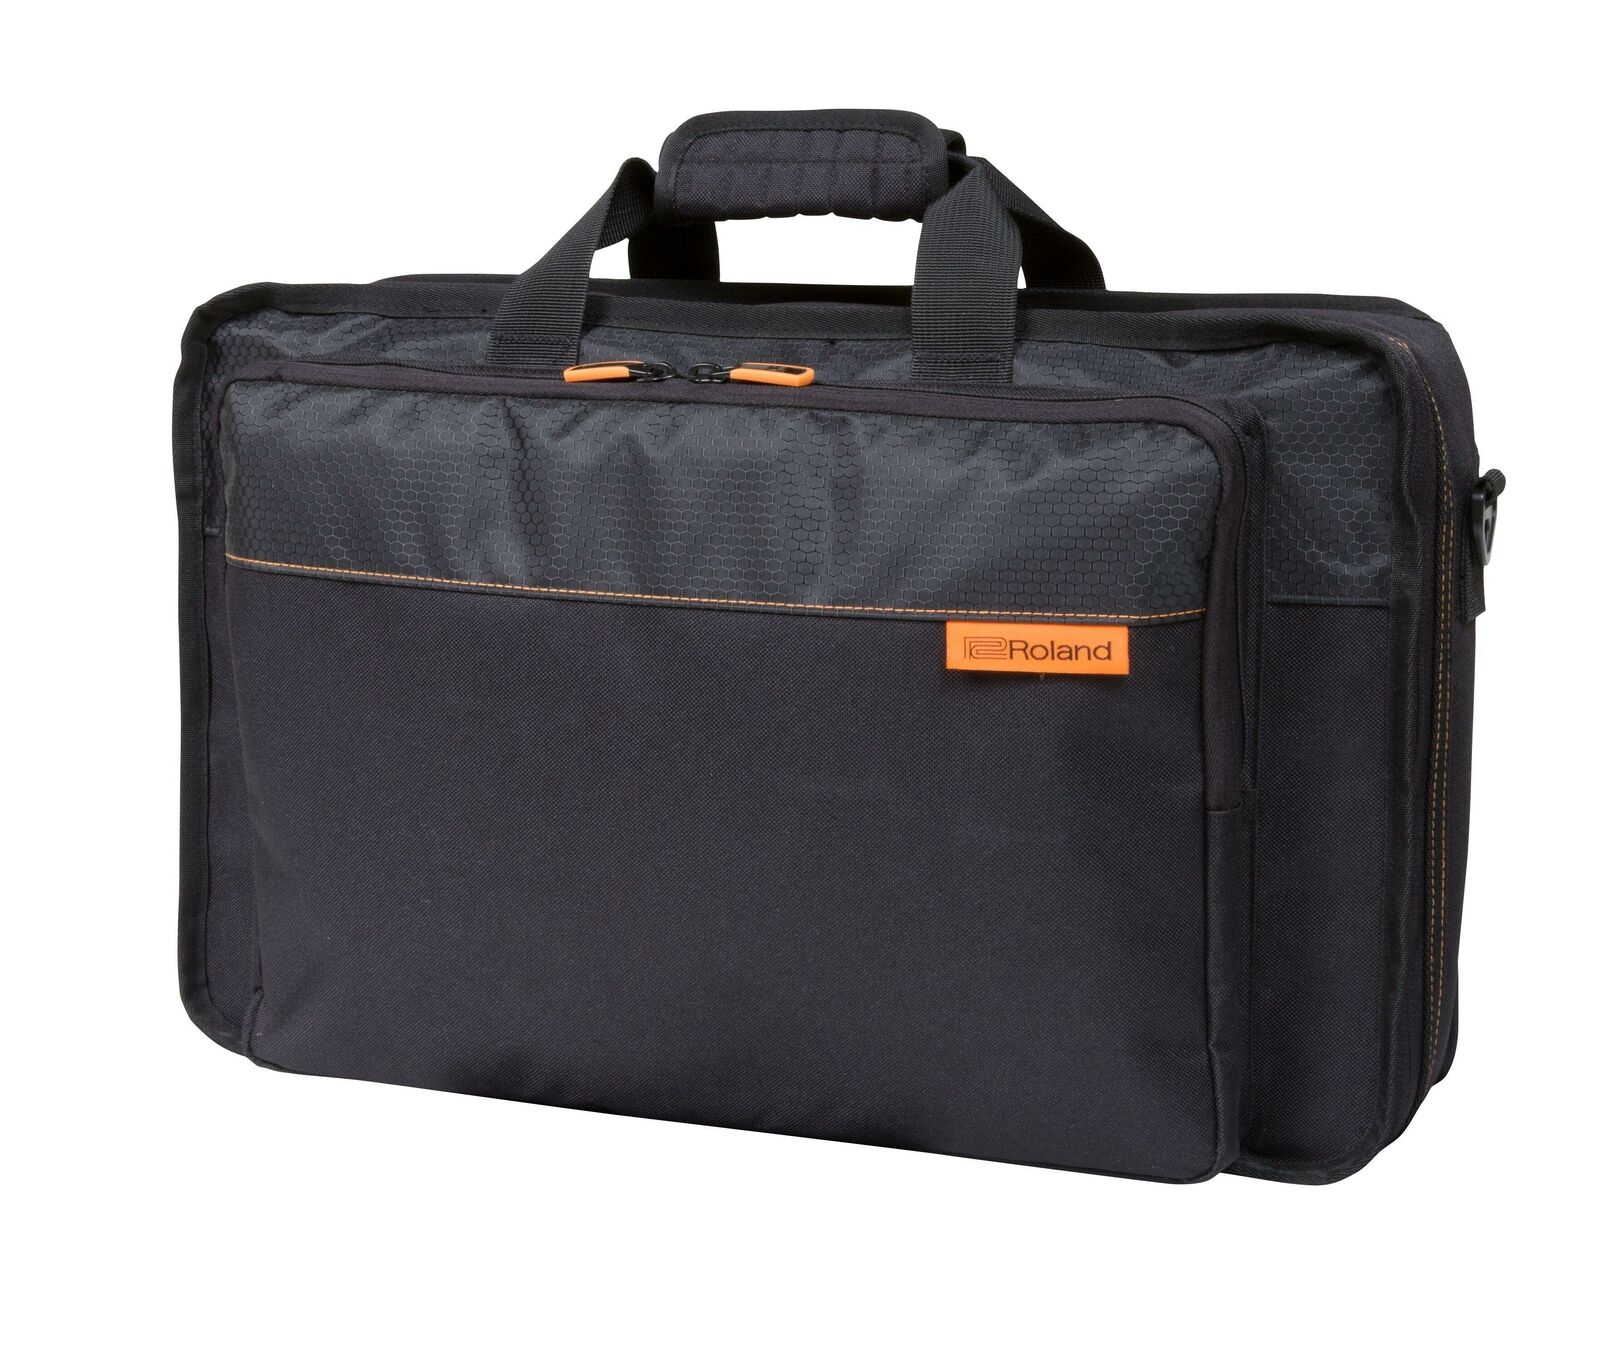 Roland Professional Bag For The Dj-202 Controller